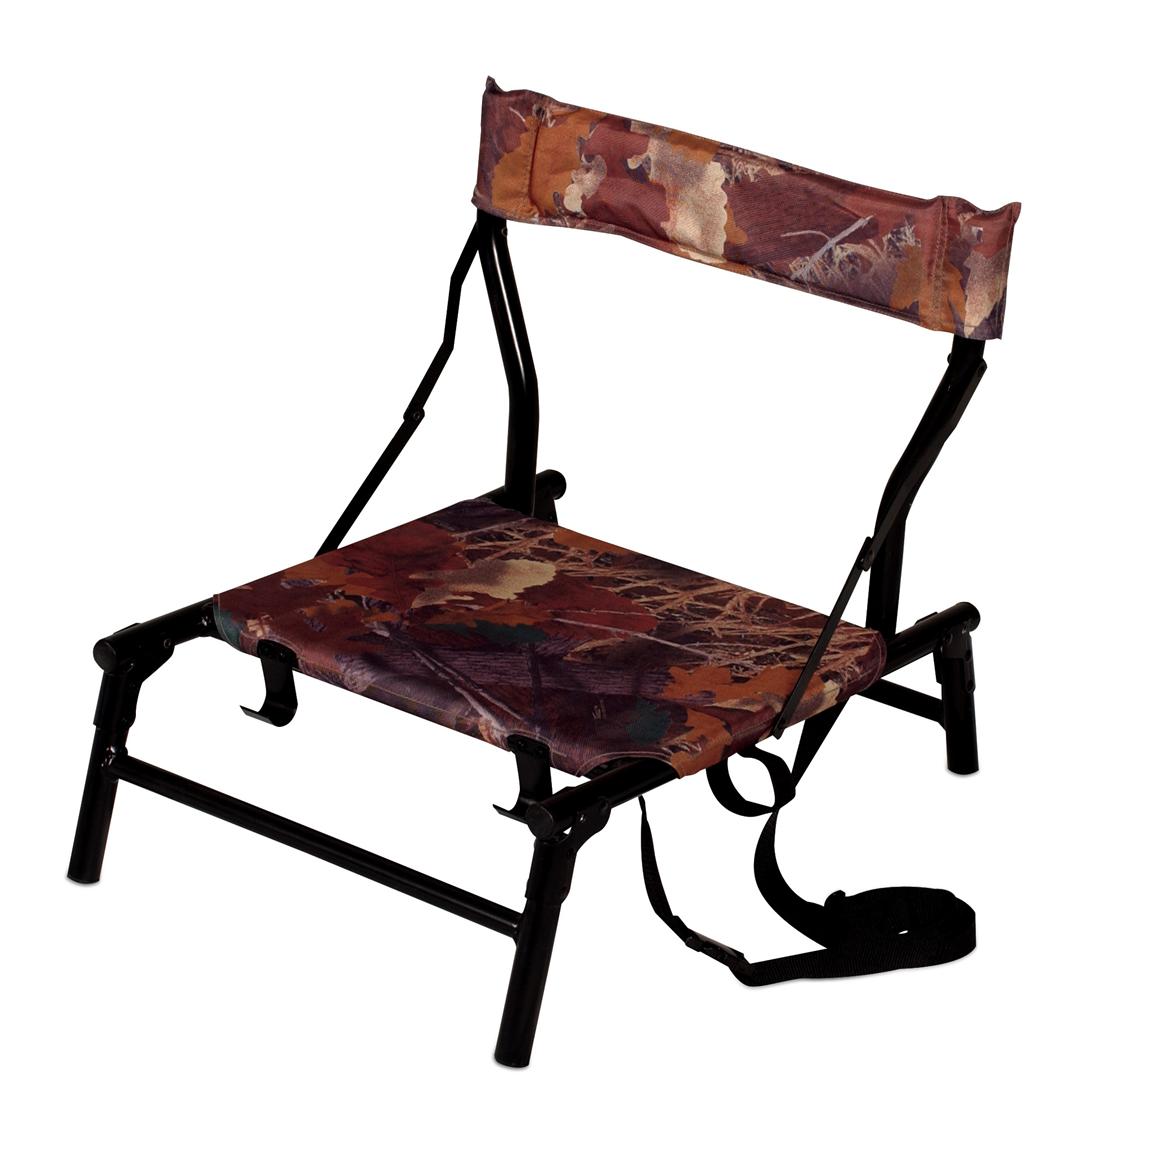 Ameristep Deluxe Turkey Hunting Seat 109826 Stools Chairs Seat Cushions At Sportsman S Guide